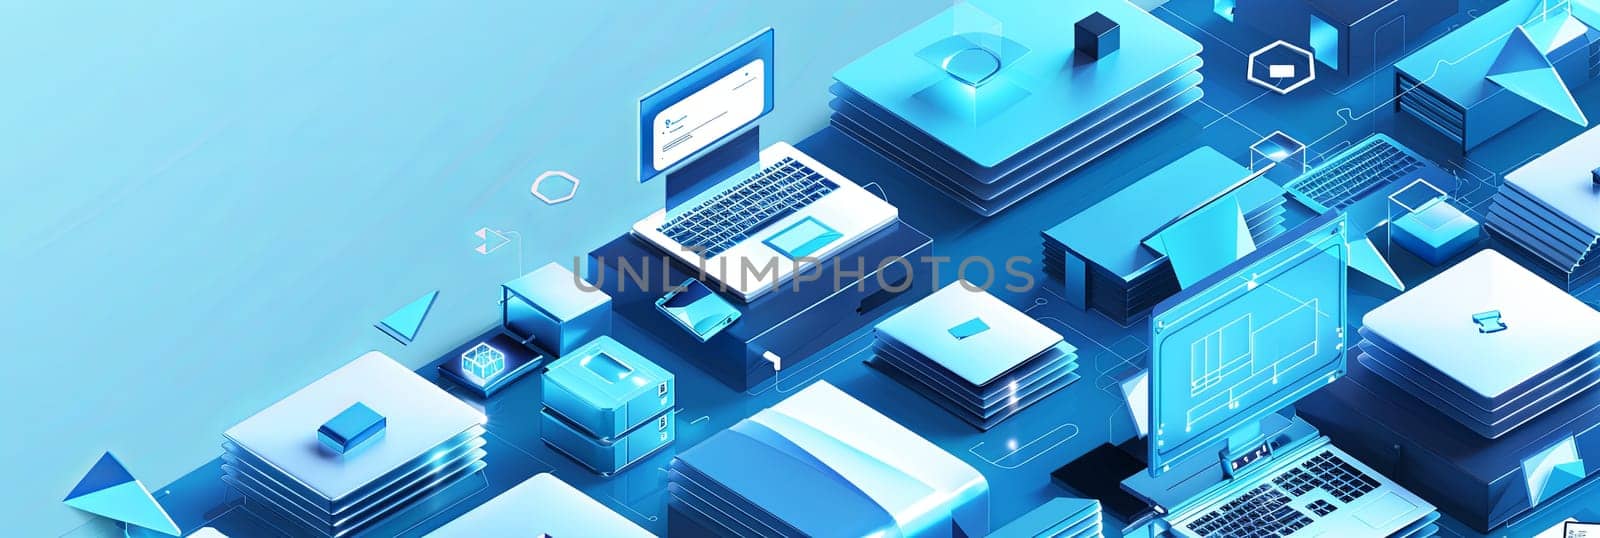 Isometric computers, laptops, and other technology equipment on a blue abstract background. Ideal for computer service, tech repair, and cloud storage promotion.